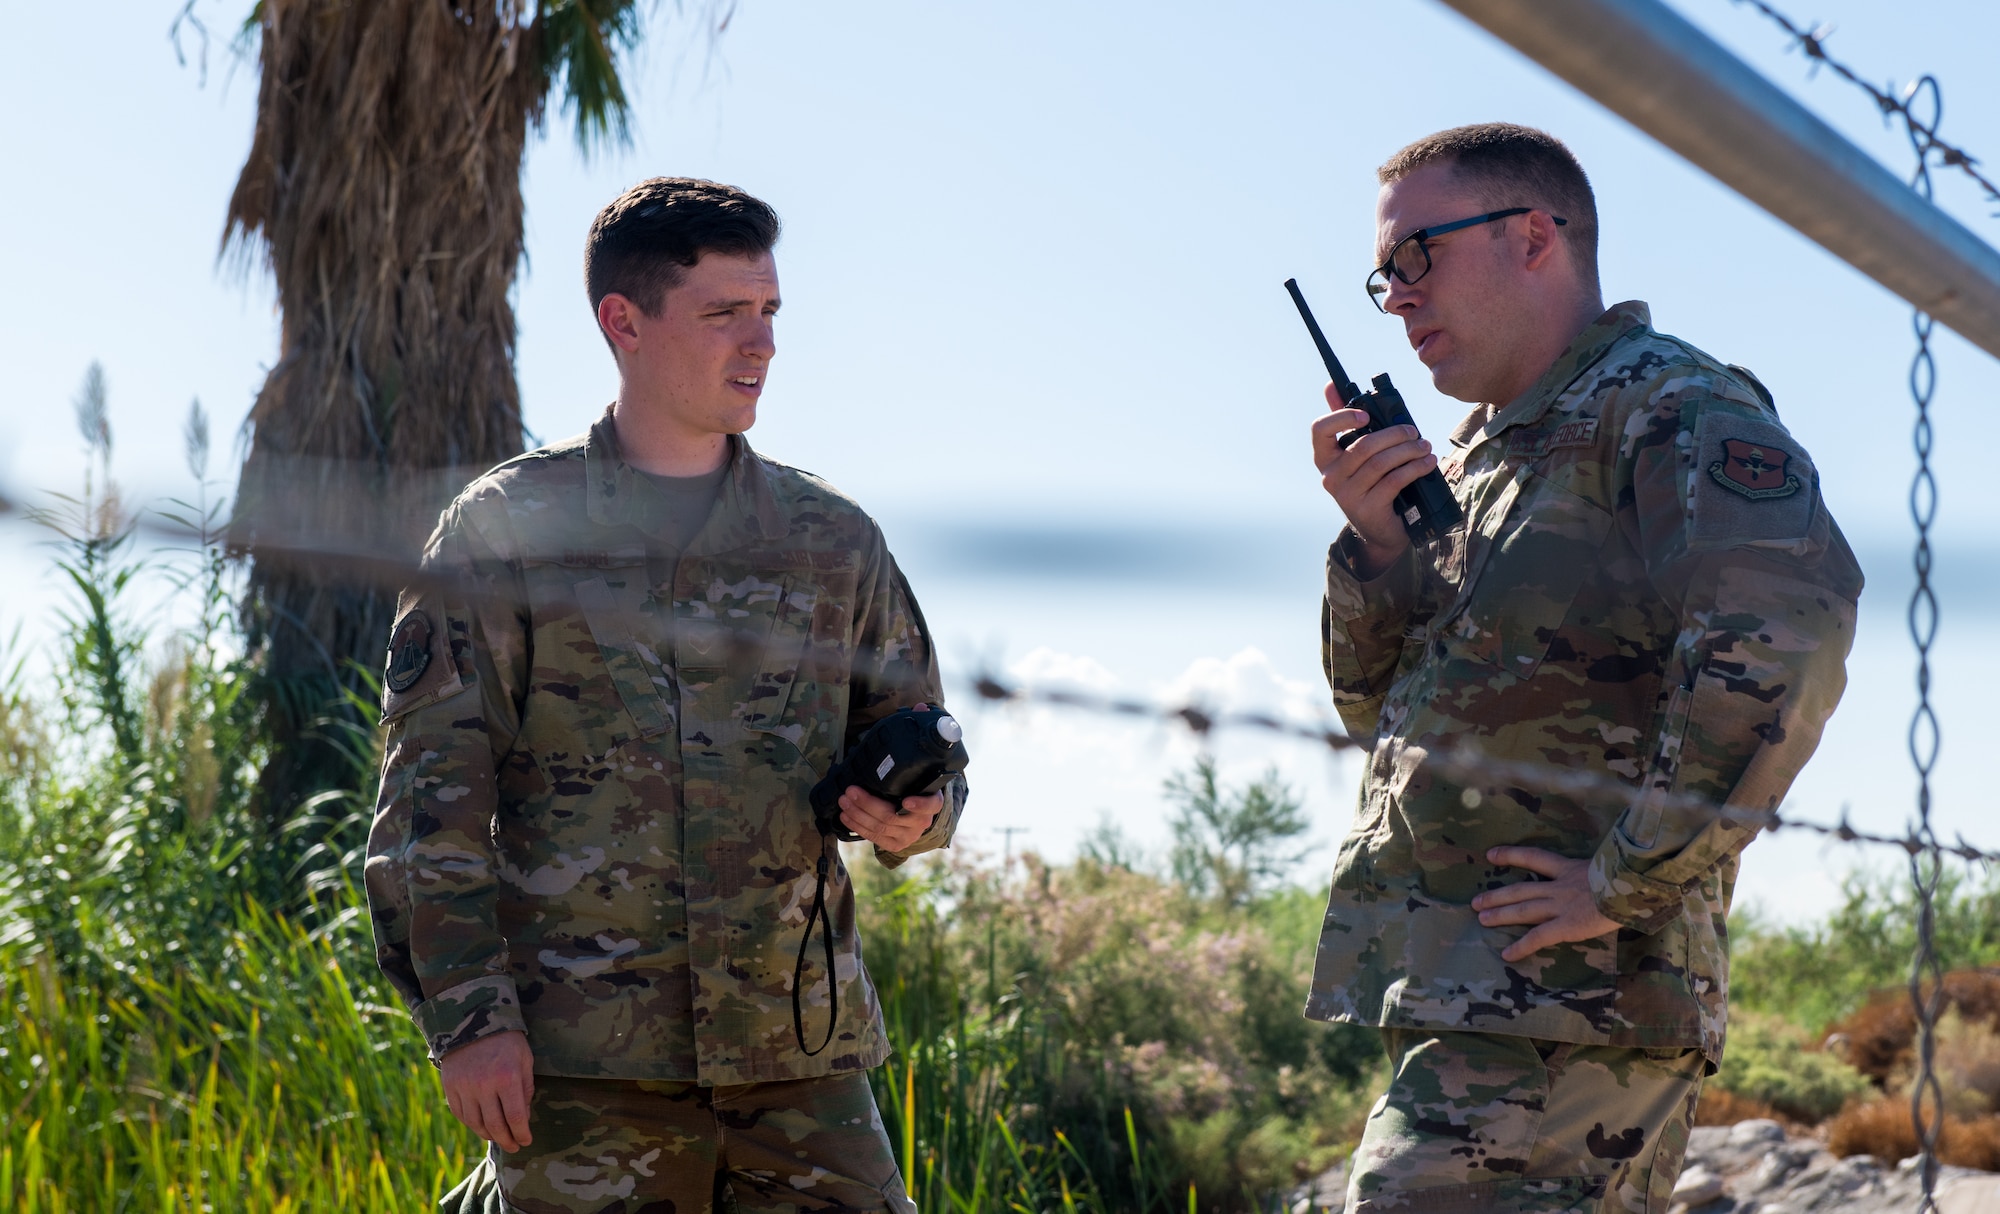 Senior Airman Joseph Bahr (left), 56th Aeromedicine Squadron bioenvironmental technician, and Staff Sgt. Eric Roberts, 56th Aeromedicine Squadron noncommissioned officer in charge of Radiation and Safety Operations Element, monitor volatile organic compounds in the air during a fuel spill exercise Oct. 4, 2019, at Luke Air Force Base, Ariz.